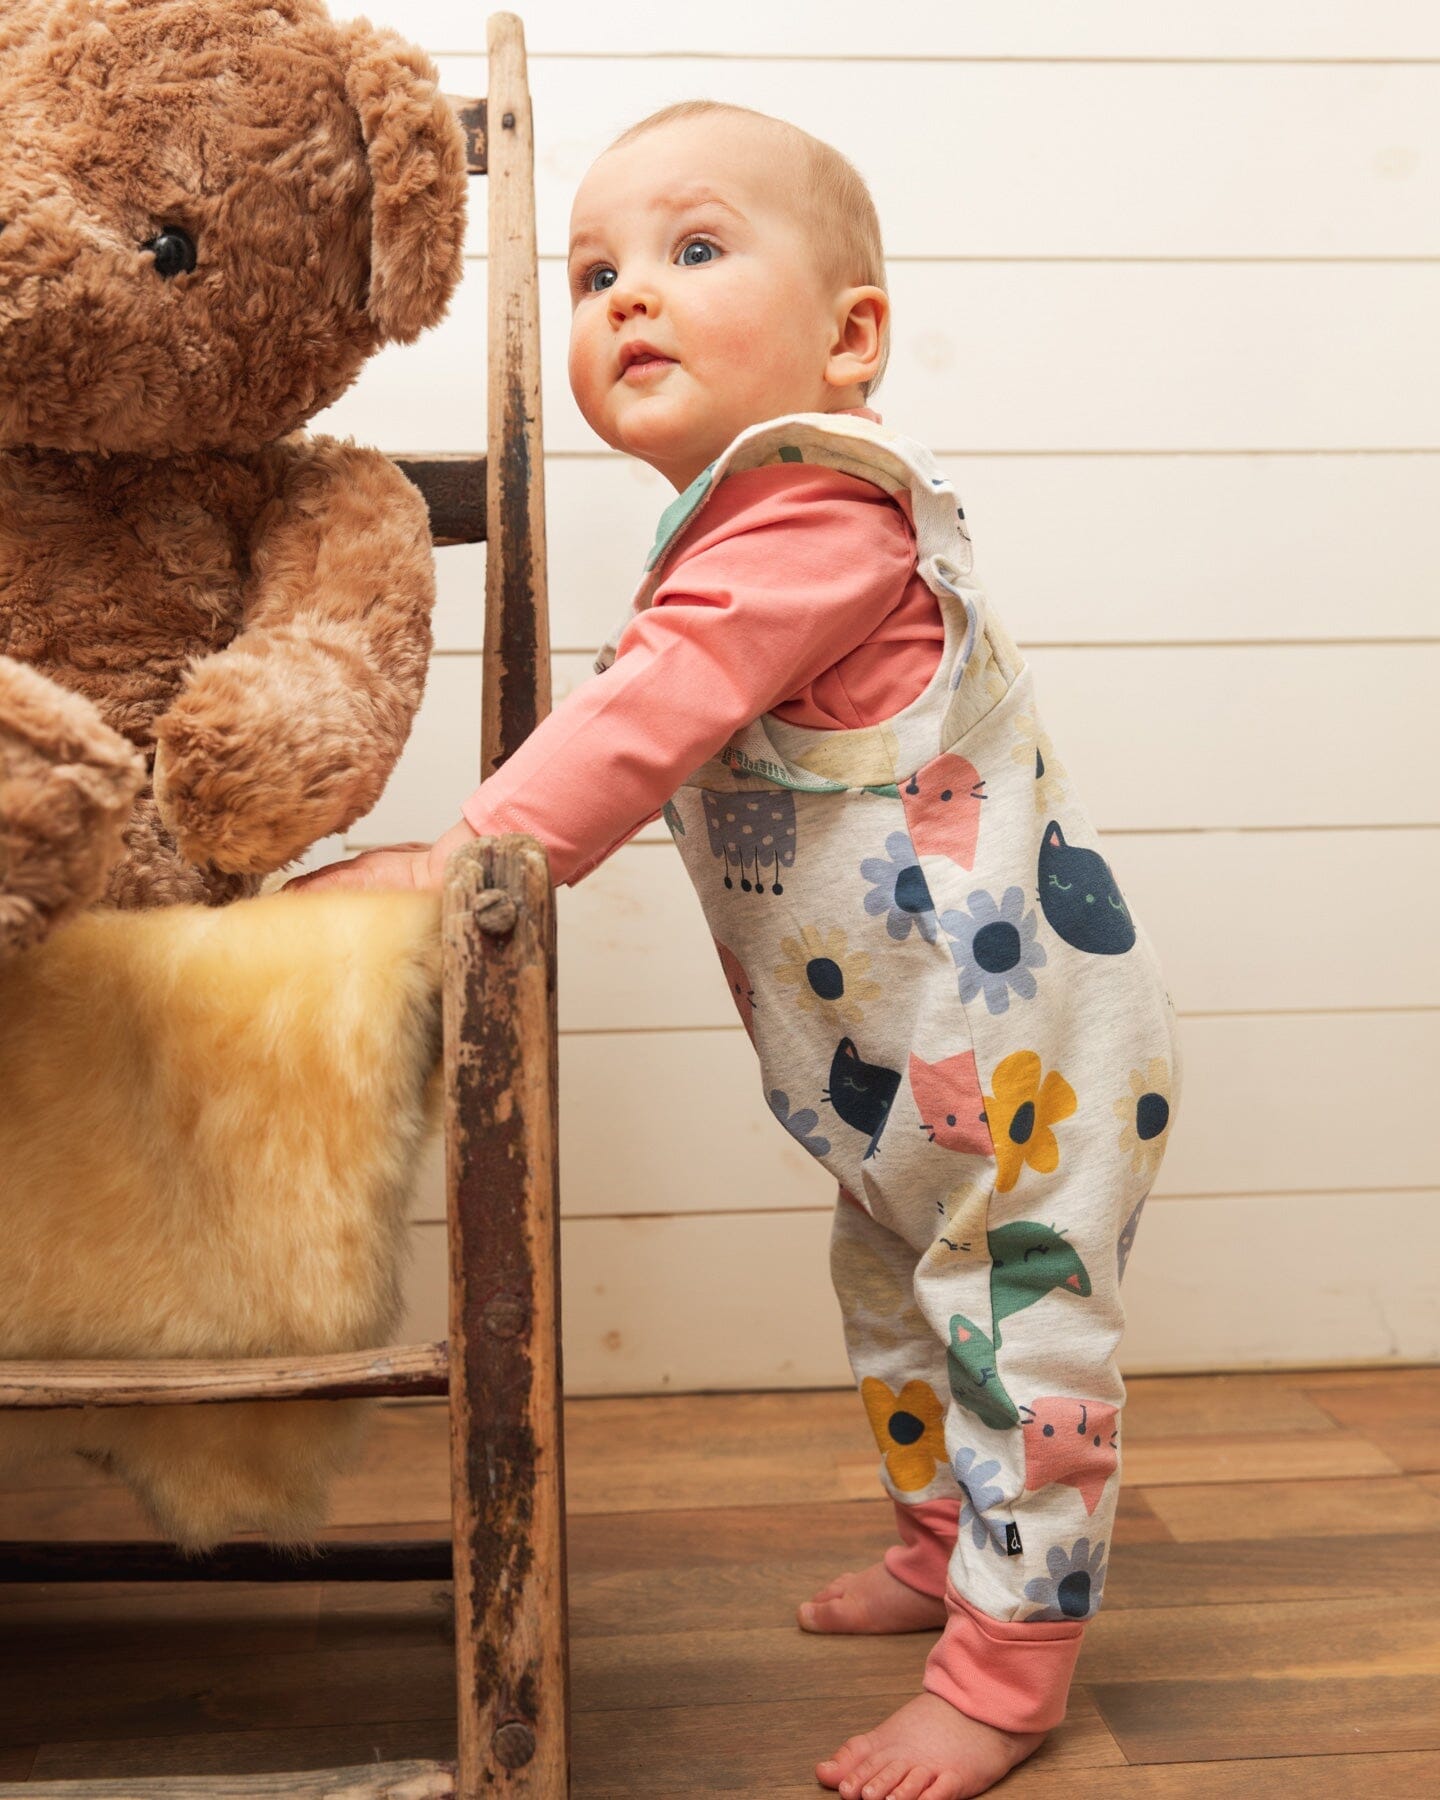 Long Sleeve Organic Cotton Top And French Terry Overalls Set Oatmeal Flowery Cats Print - F20E10_662